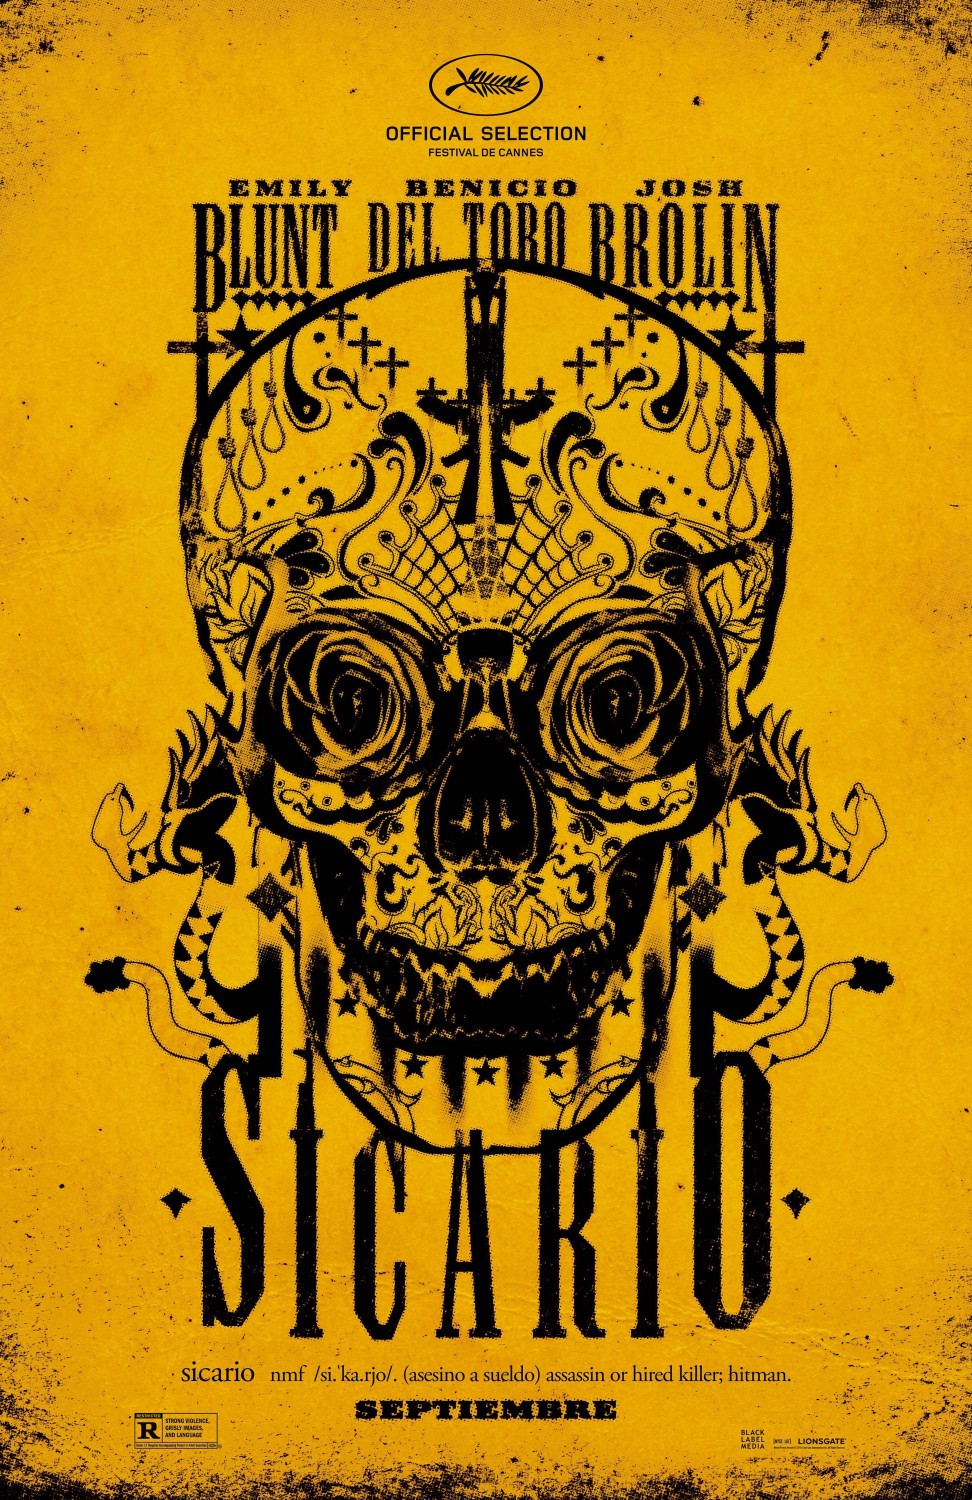 Extra Large Movie Poster Image for Sicario (#2 of 13)